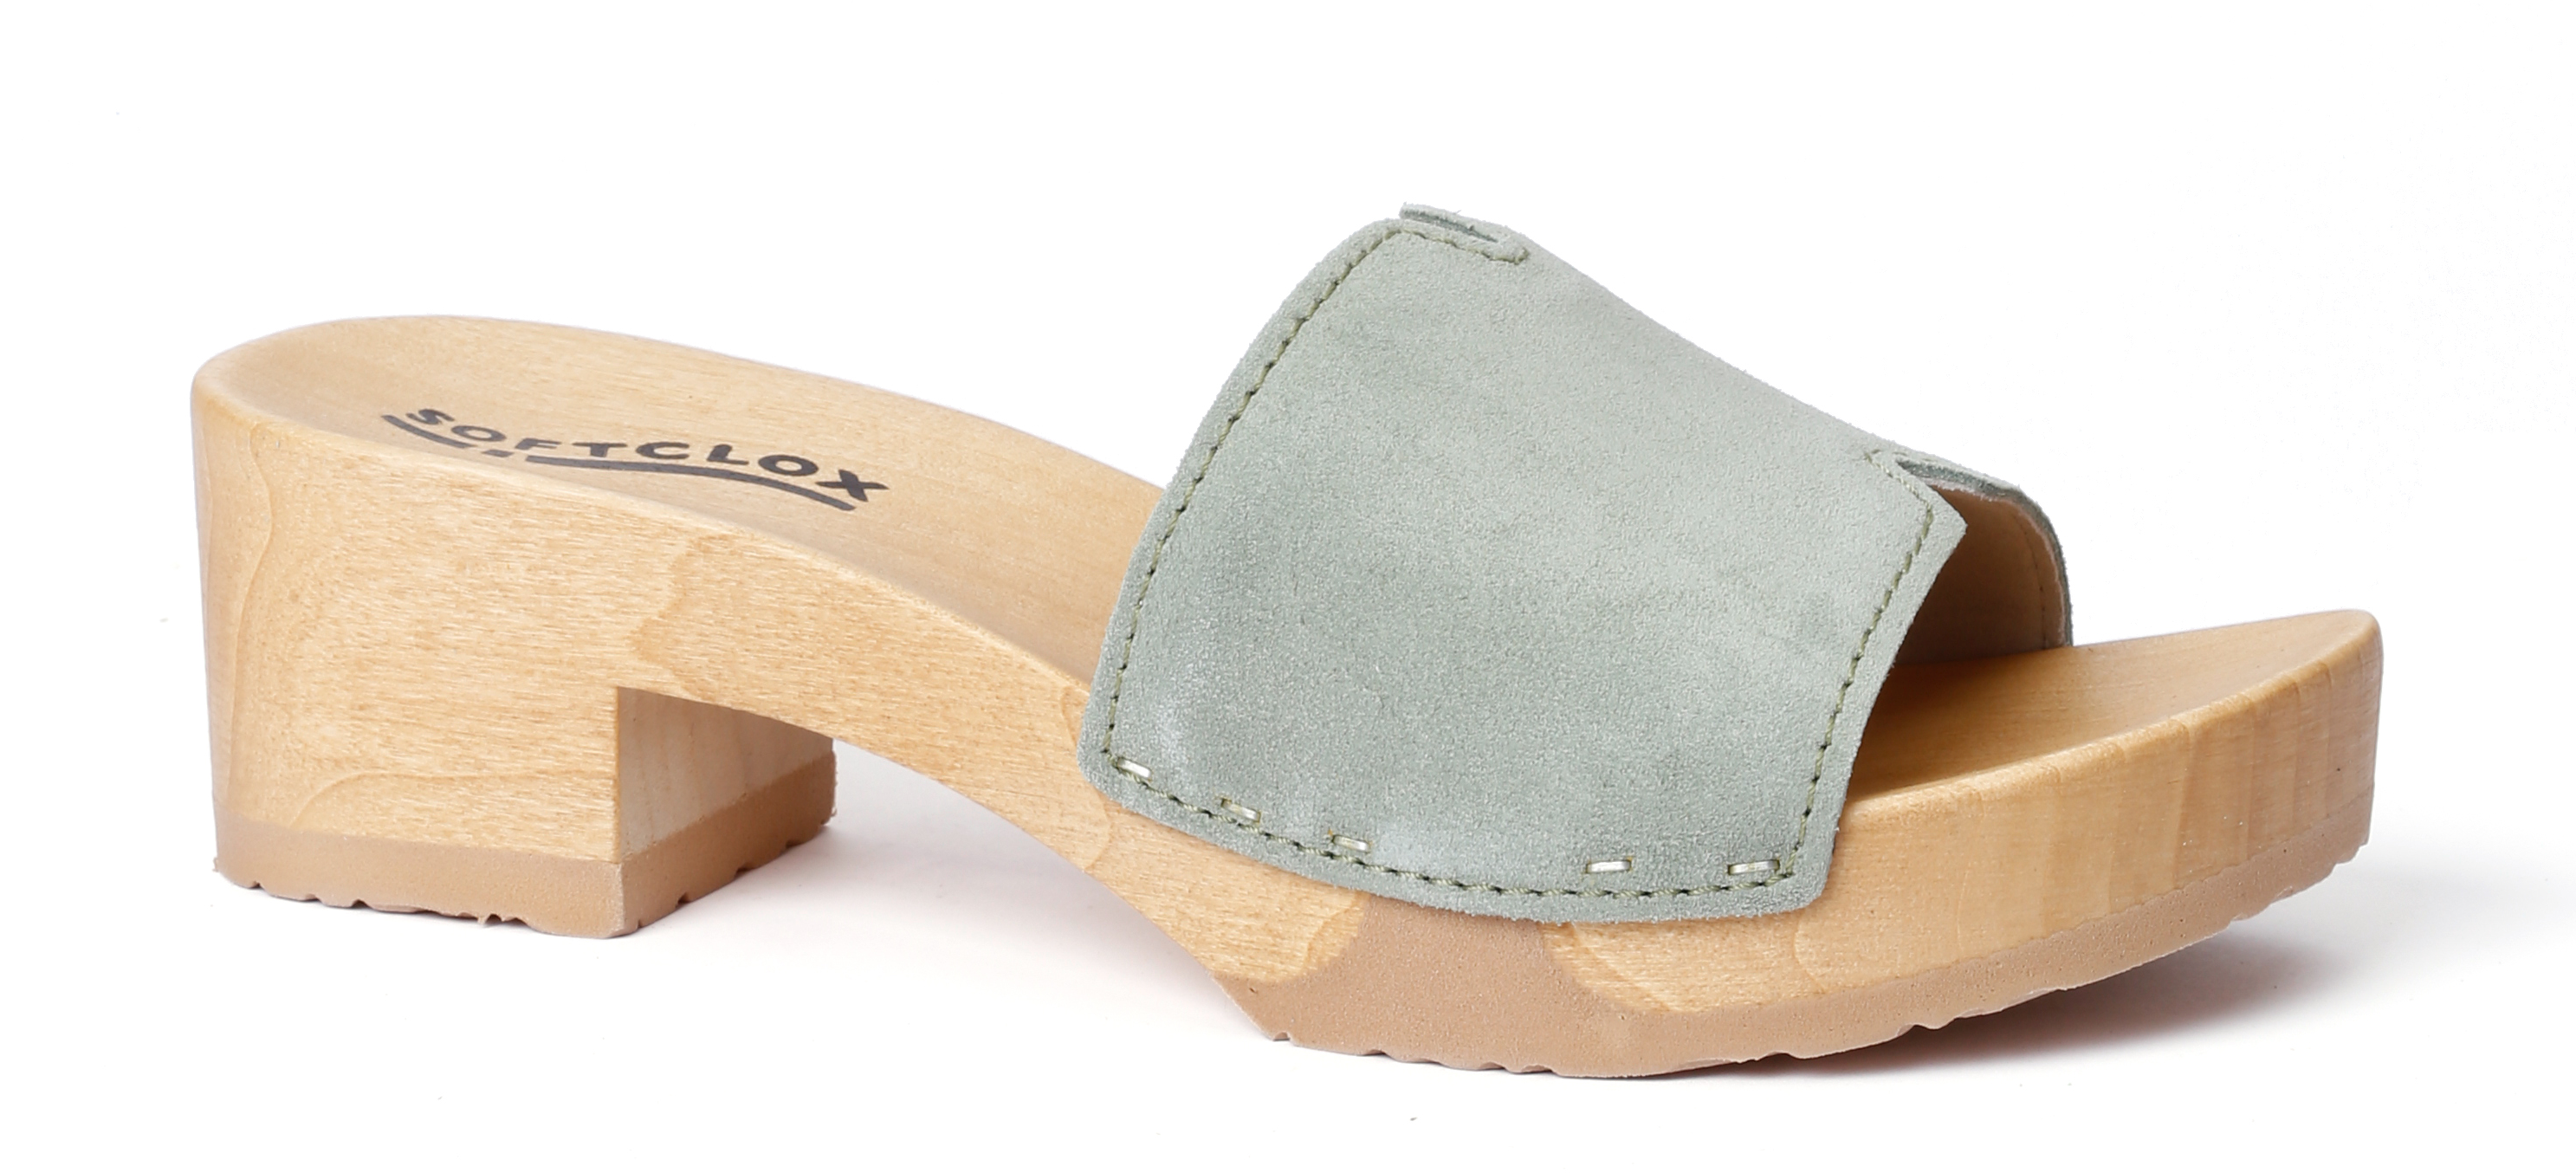 Shoe mule, made from poplar wood with smooth suede  in color mint by Softclox